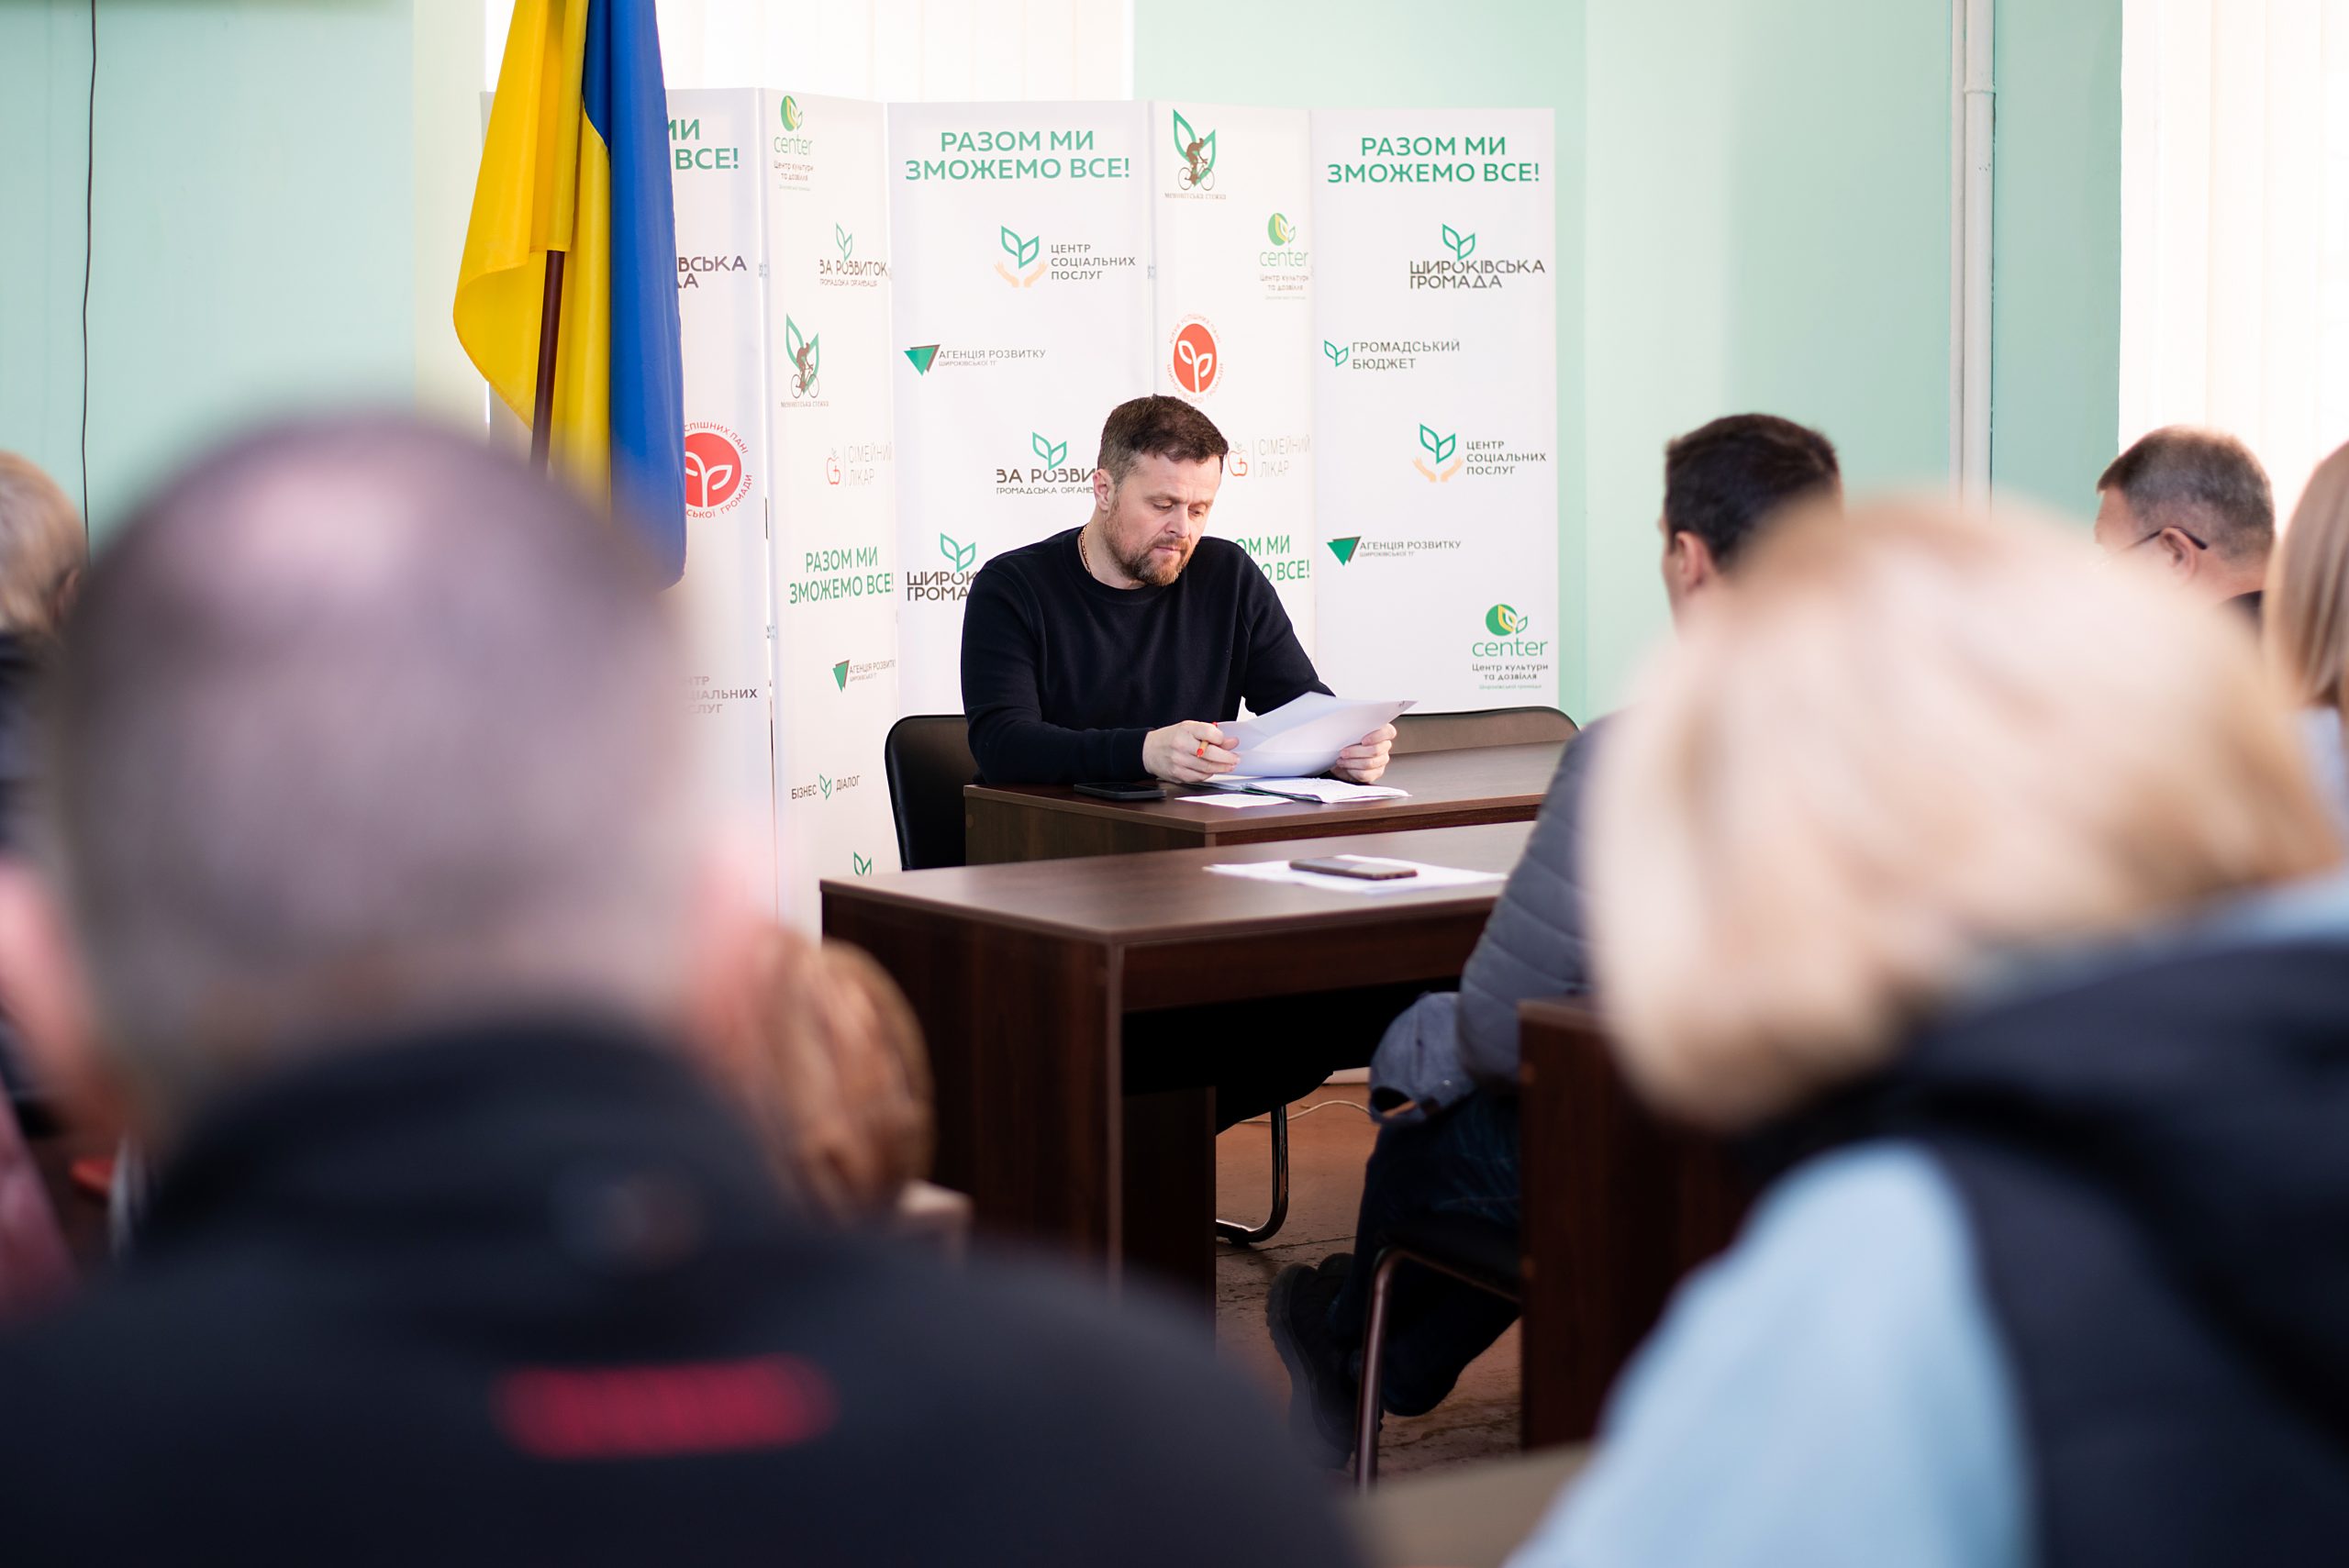 Community Head Denys Korotenko holds a working meeting, March 2022, photo by Oleksandr Ivchyk